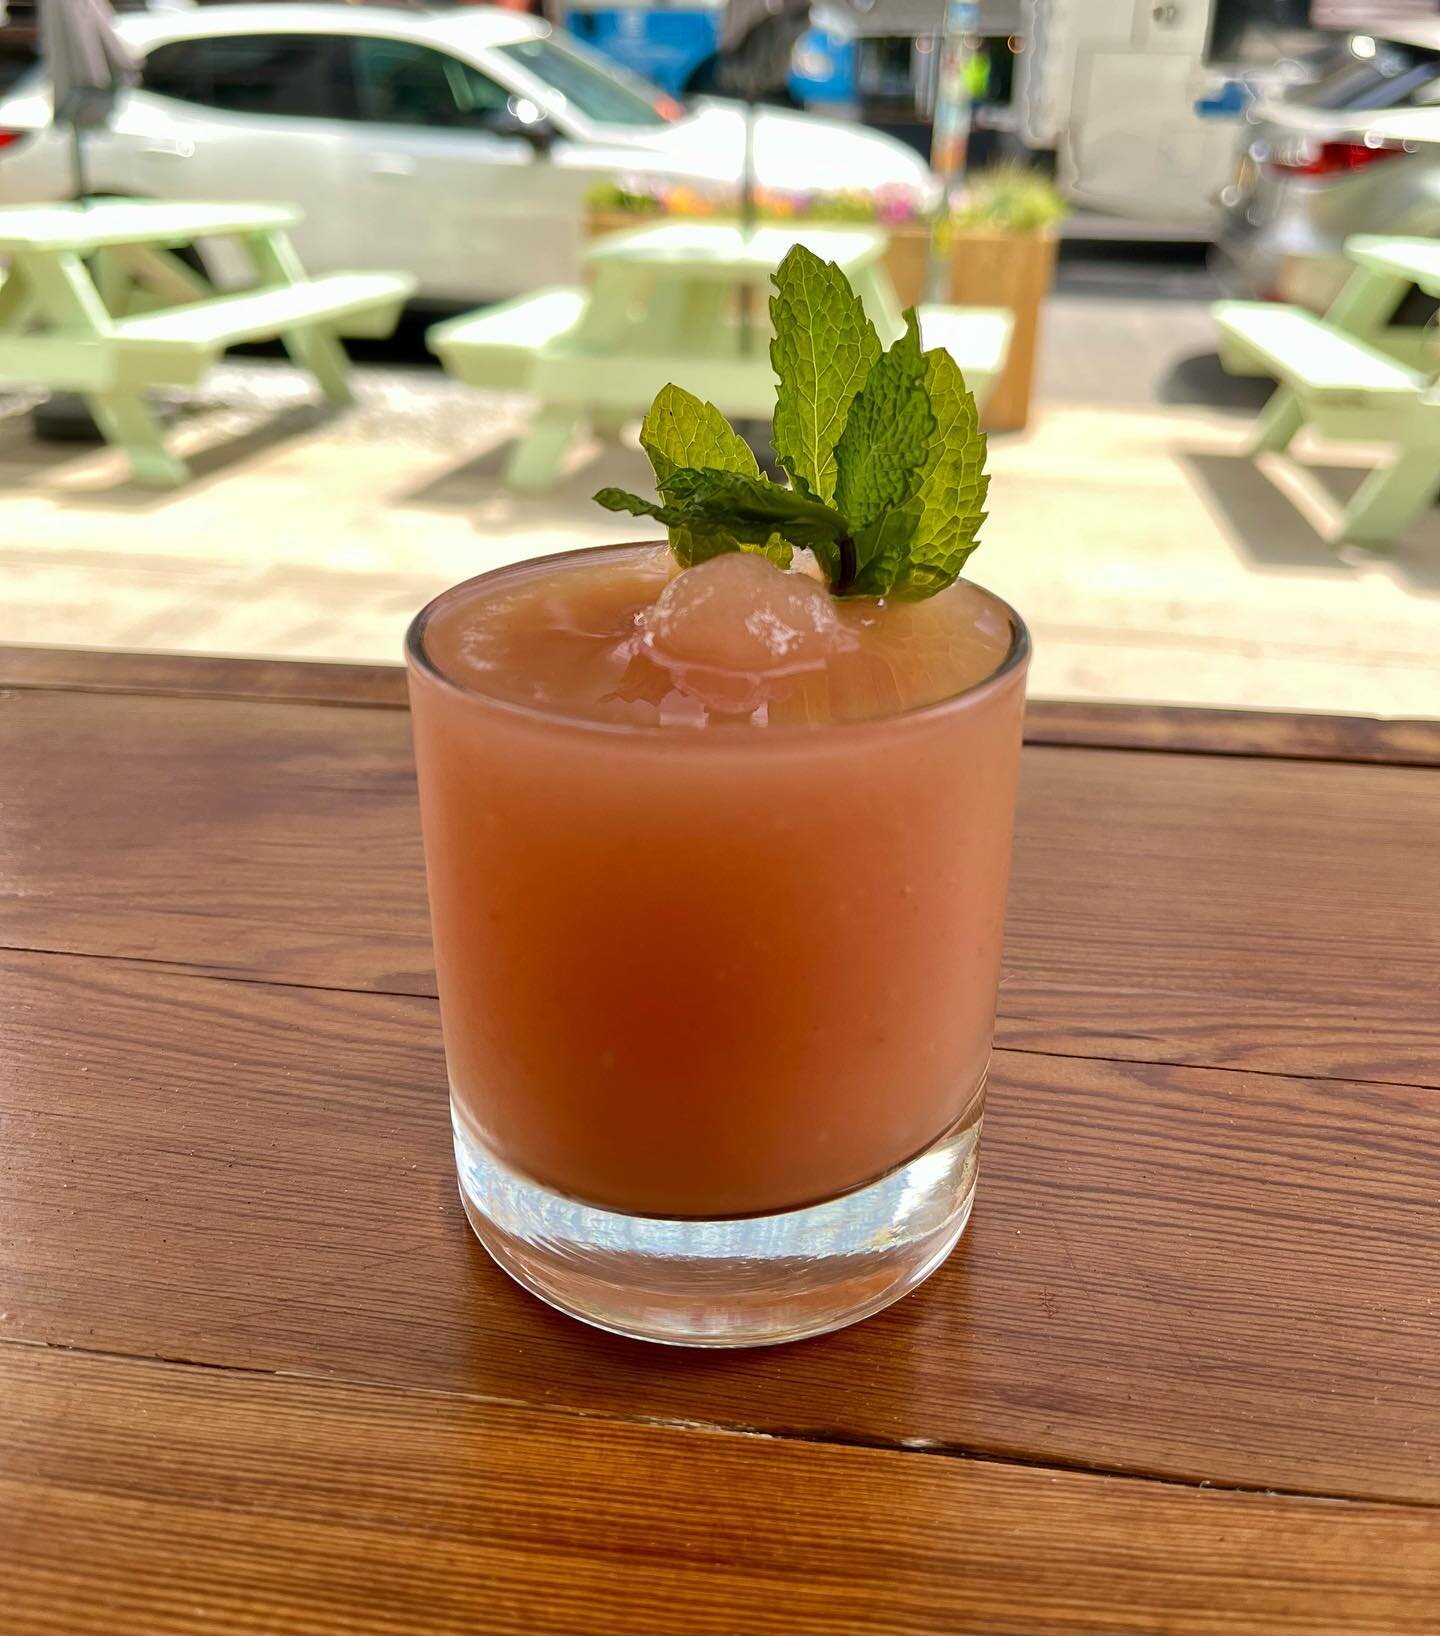 Fros&eacute; season is upon us🎉 Now pouring this lovely Watermelon, Mint and  Summer Water frozen🍉 Happy Hour Noon-6🥳 #summerfridays #alldayhappyhour #daydrinkersoftheworldunite